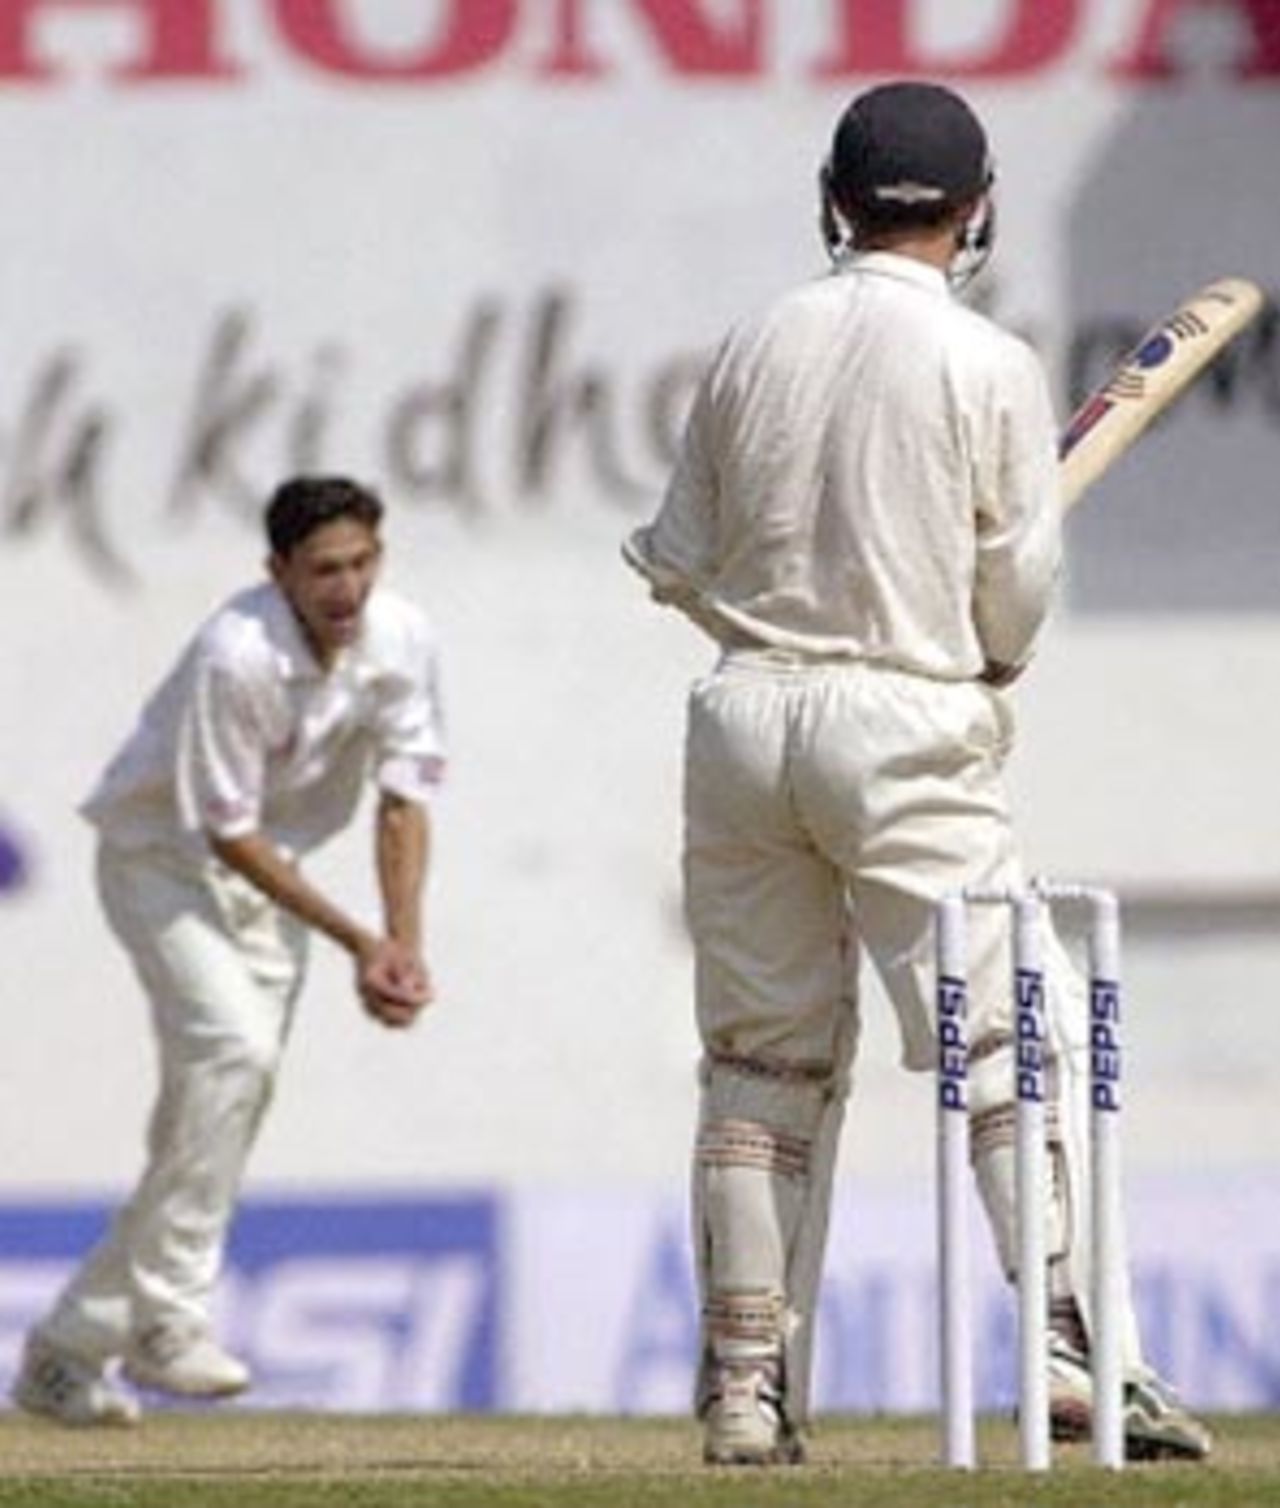 Indian pace bowler Ajit Agarkar (L) takes a catch from Zimbawean batsman Stuart Carlisle (R) off his own bowling to dismiss Carlisle on the third day 27 November 2000 of the second test match between India and Zimbabwe in Nagpur. Carlisle was out for 51 as Zimbabwe stood at 153 for 2 at lunch.